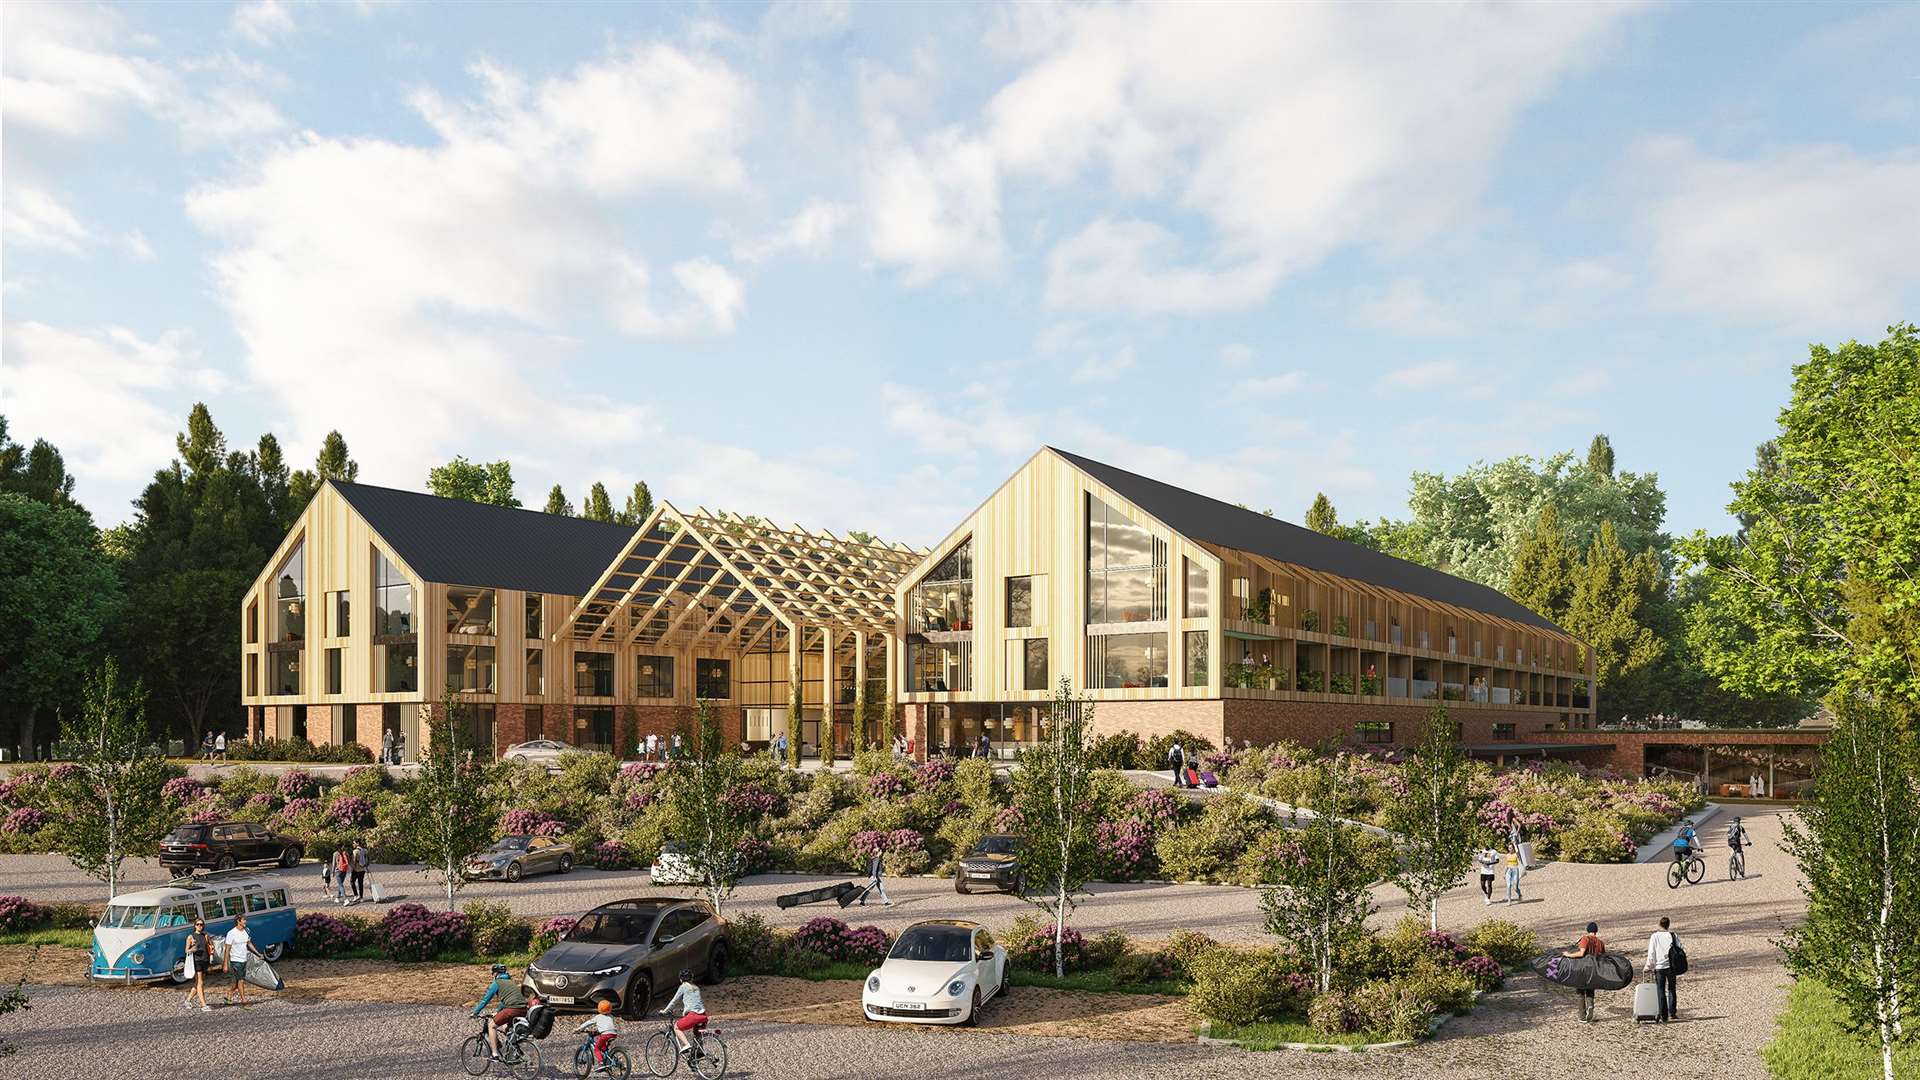 A 120-bed hotel is also on the cards